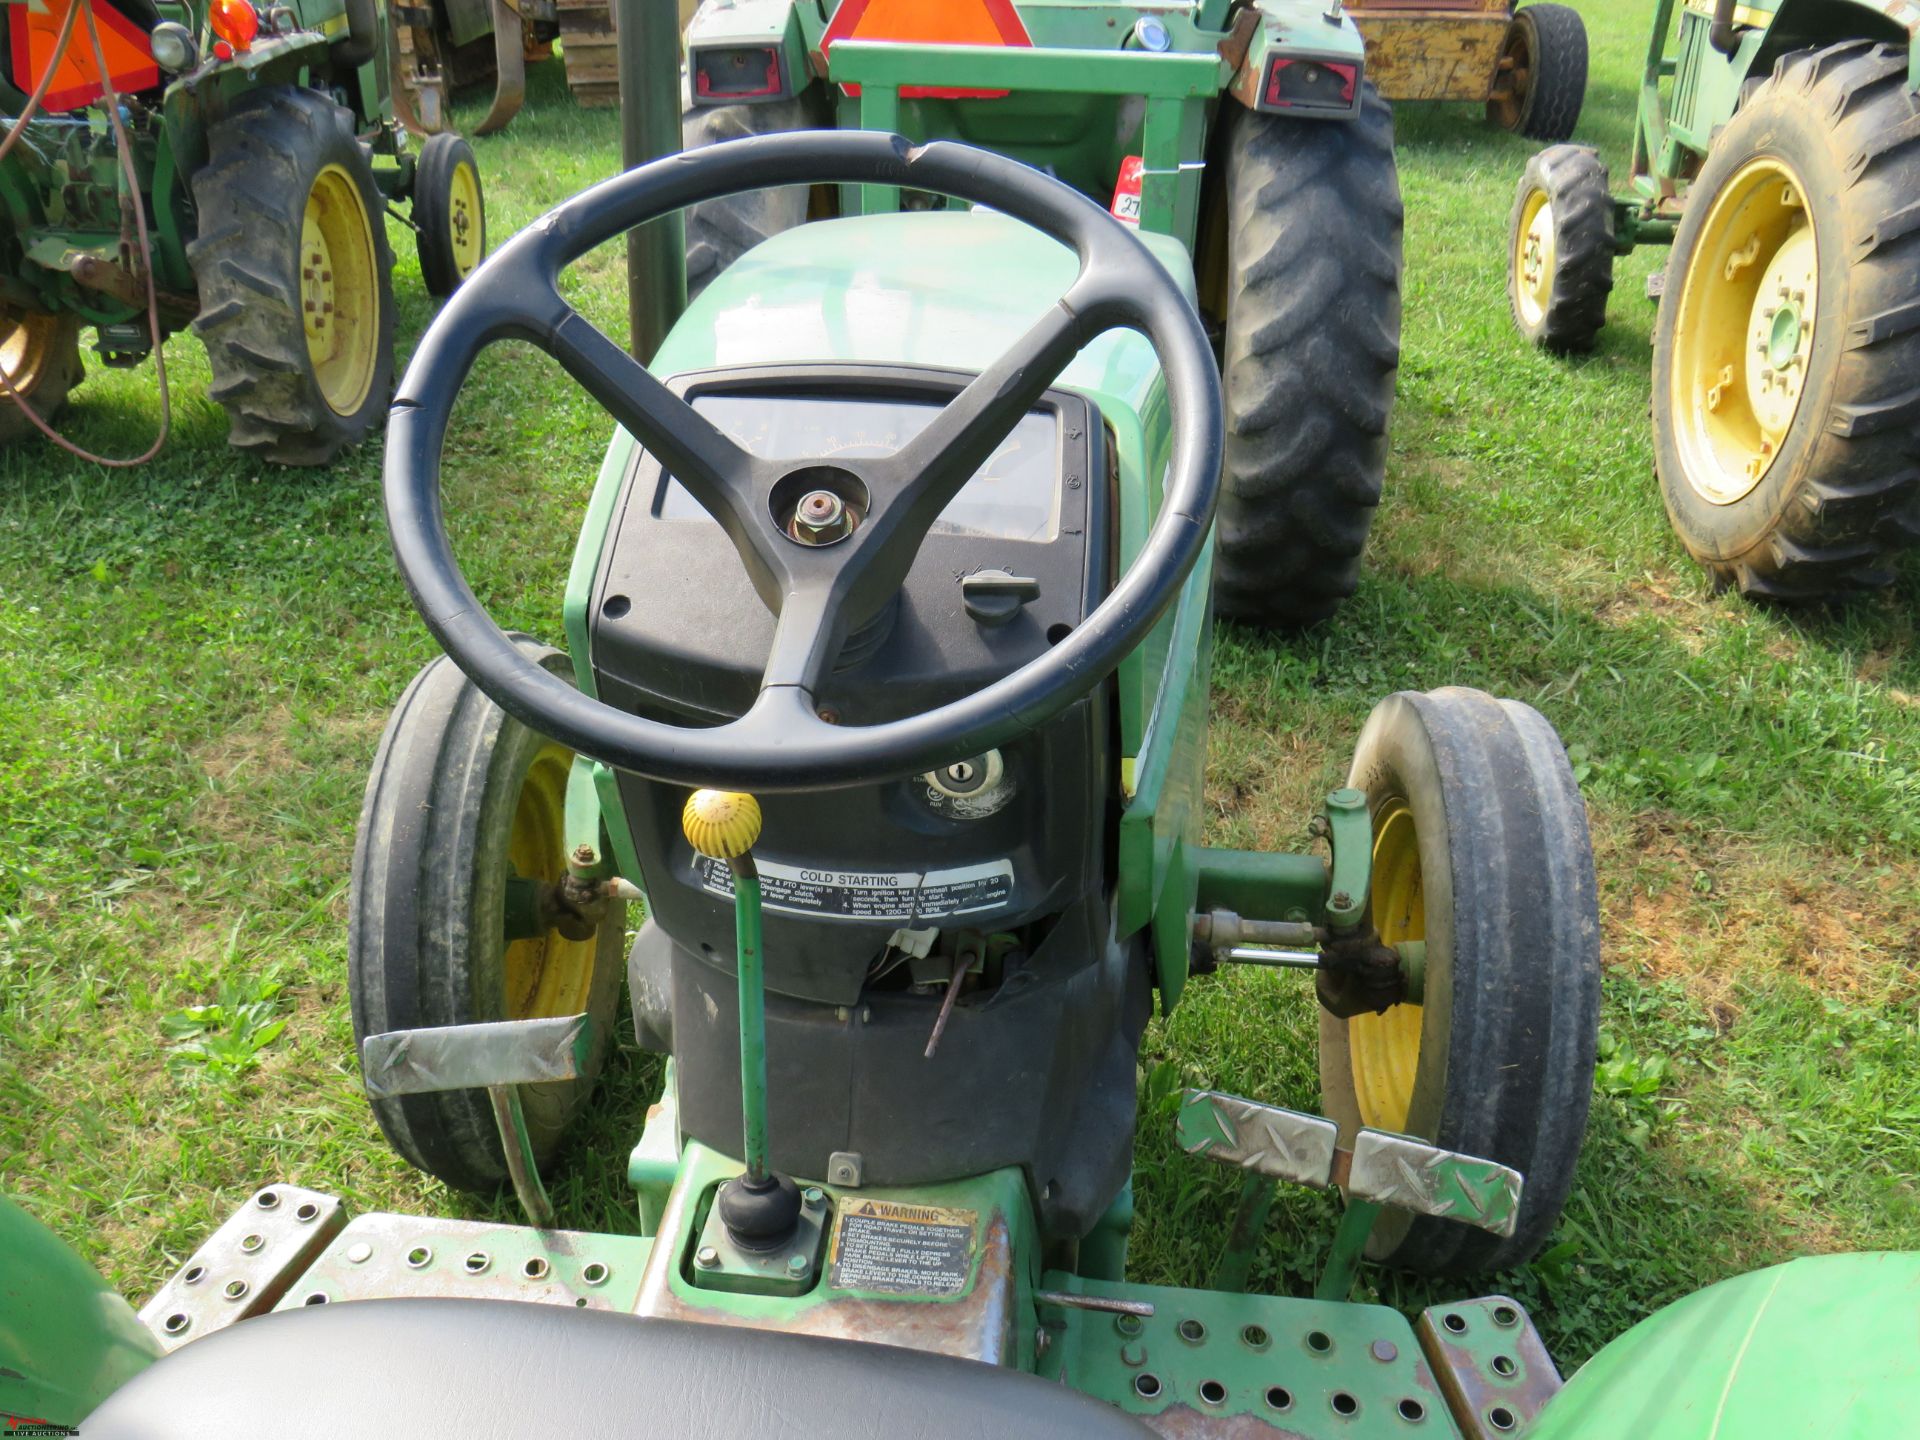 2001 JOHN DEERE 990 TRACTOR, PTO, NO 3PT ARMS, 14.9-24 TIRES, 5555 HOURS SHOWING (HOURS SUBJECT TO - Image 6 of 8